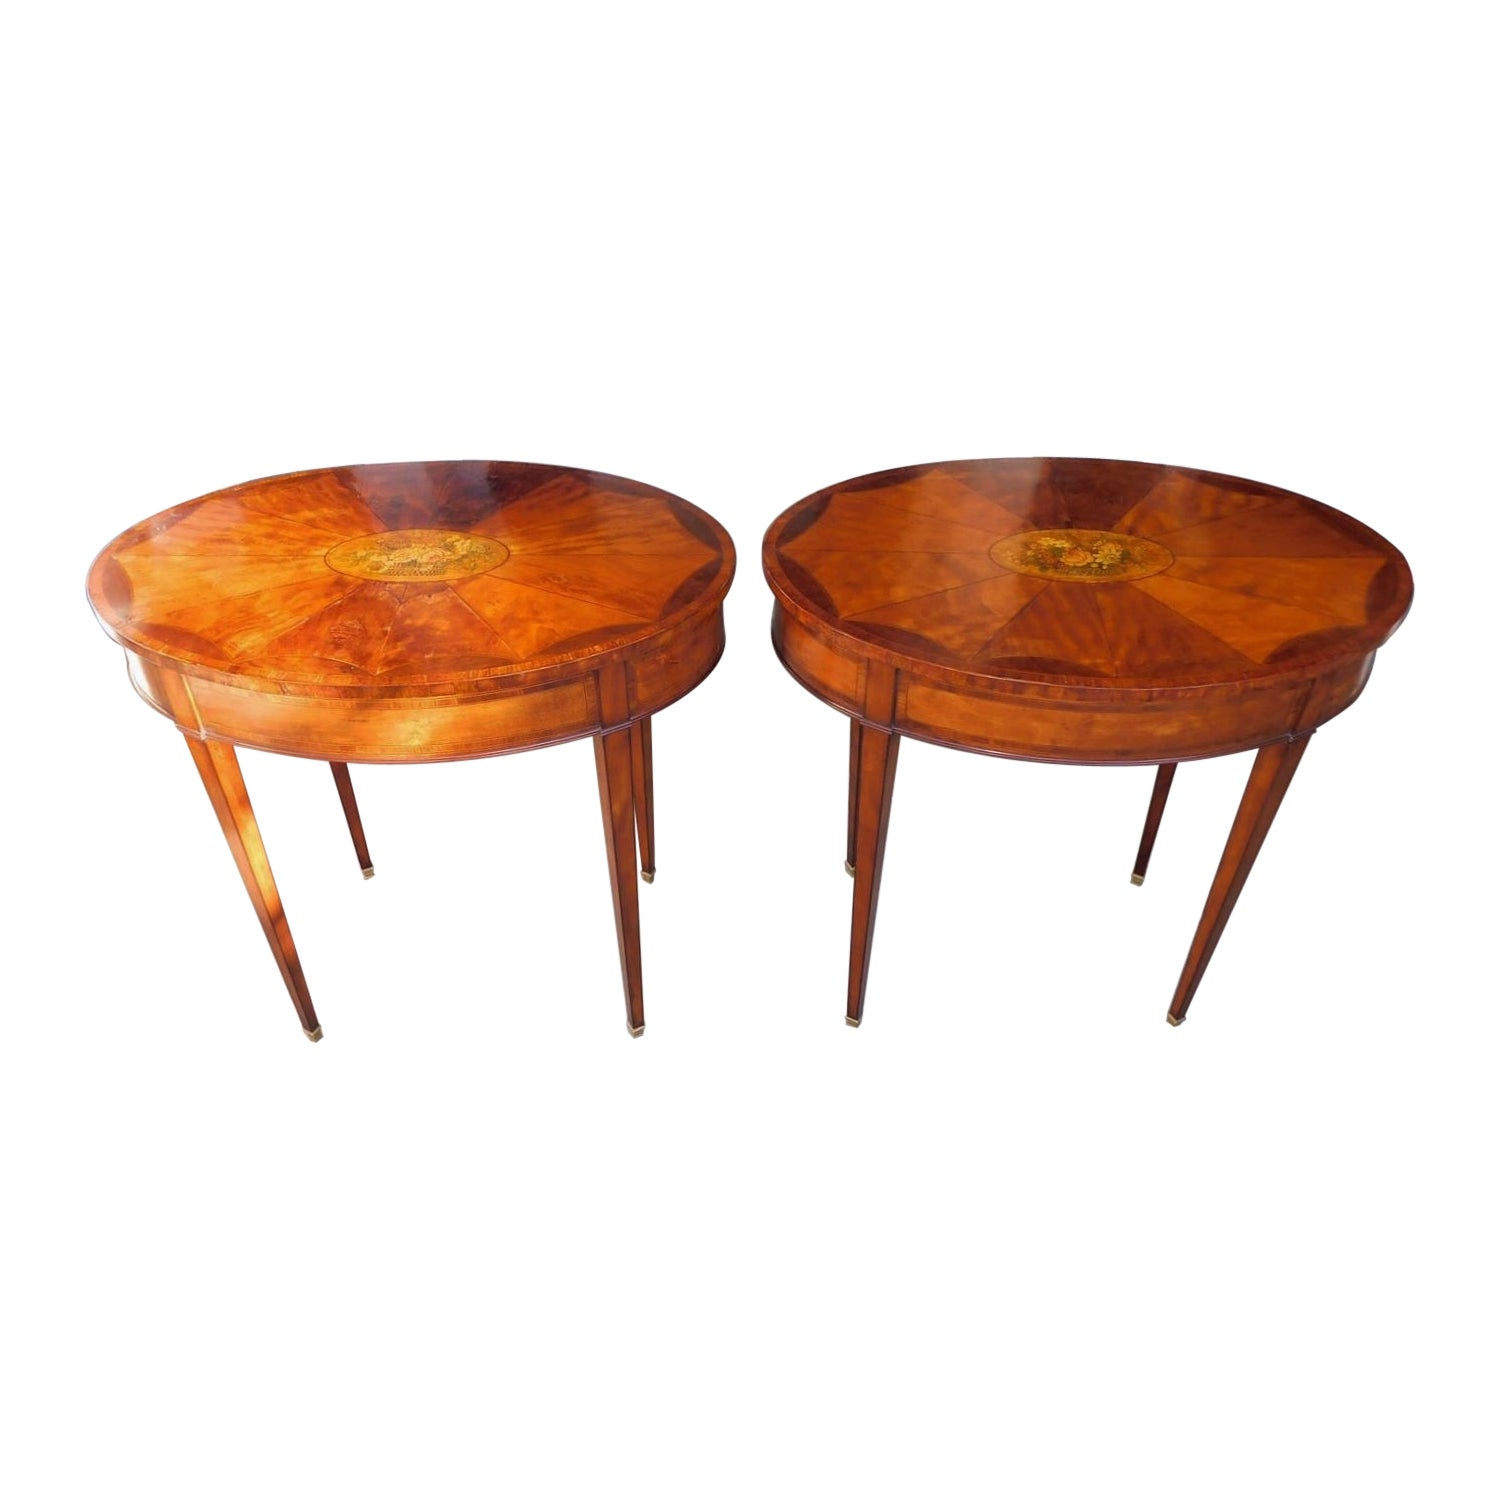 Pair of English Oval Satinwood & Ebony Inlay Flower Basket Console Tables C 1840 For Sale